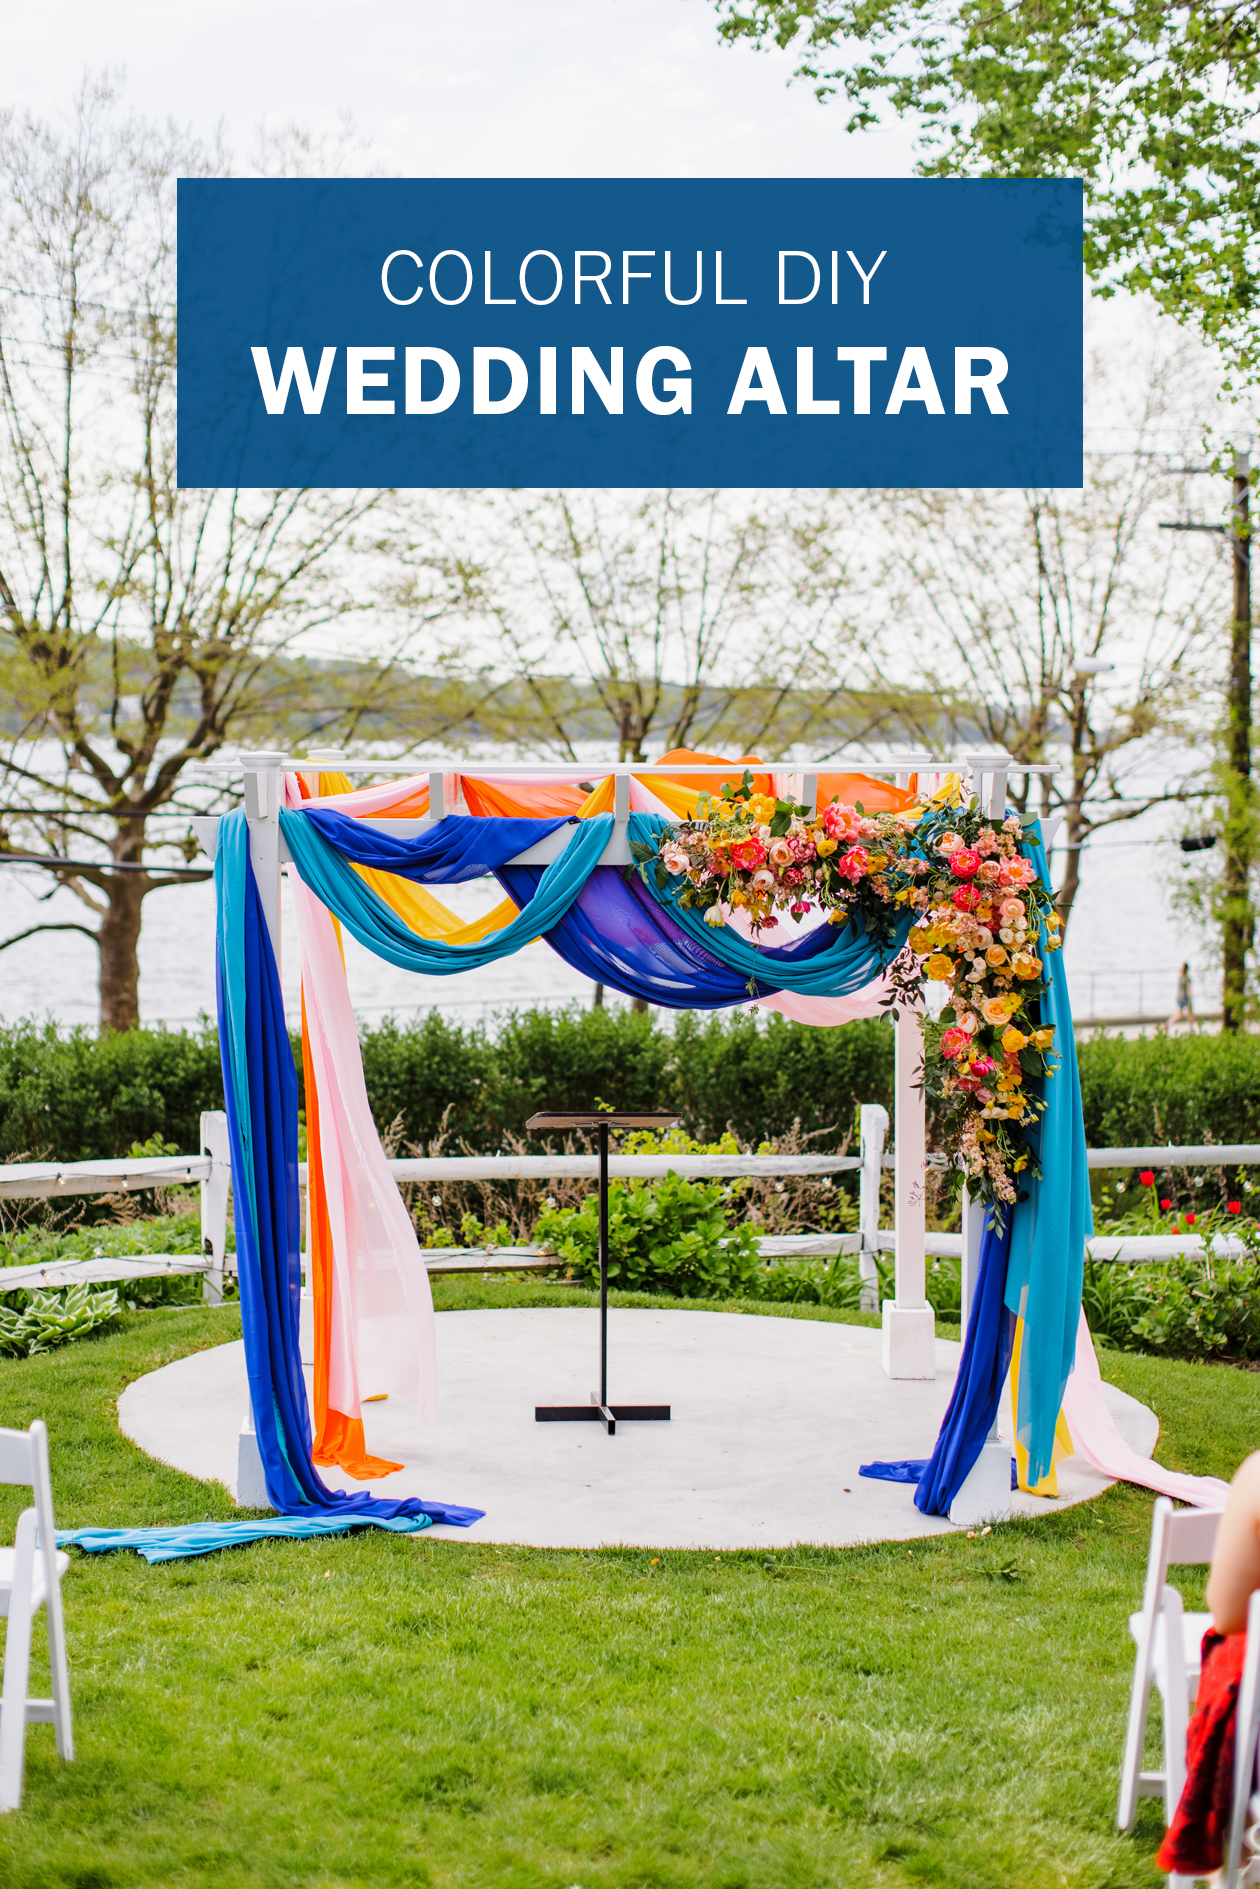 Our Colorful Wedding Altar